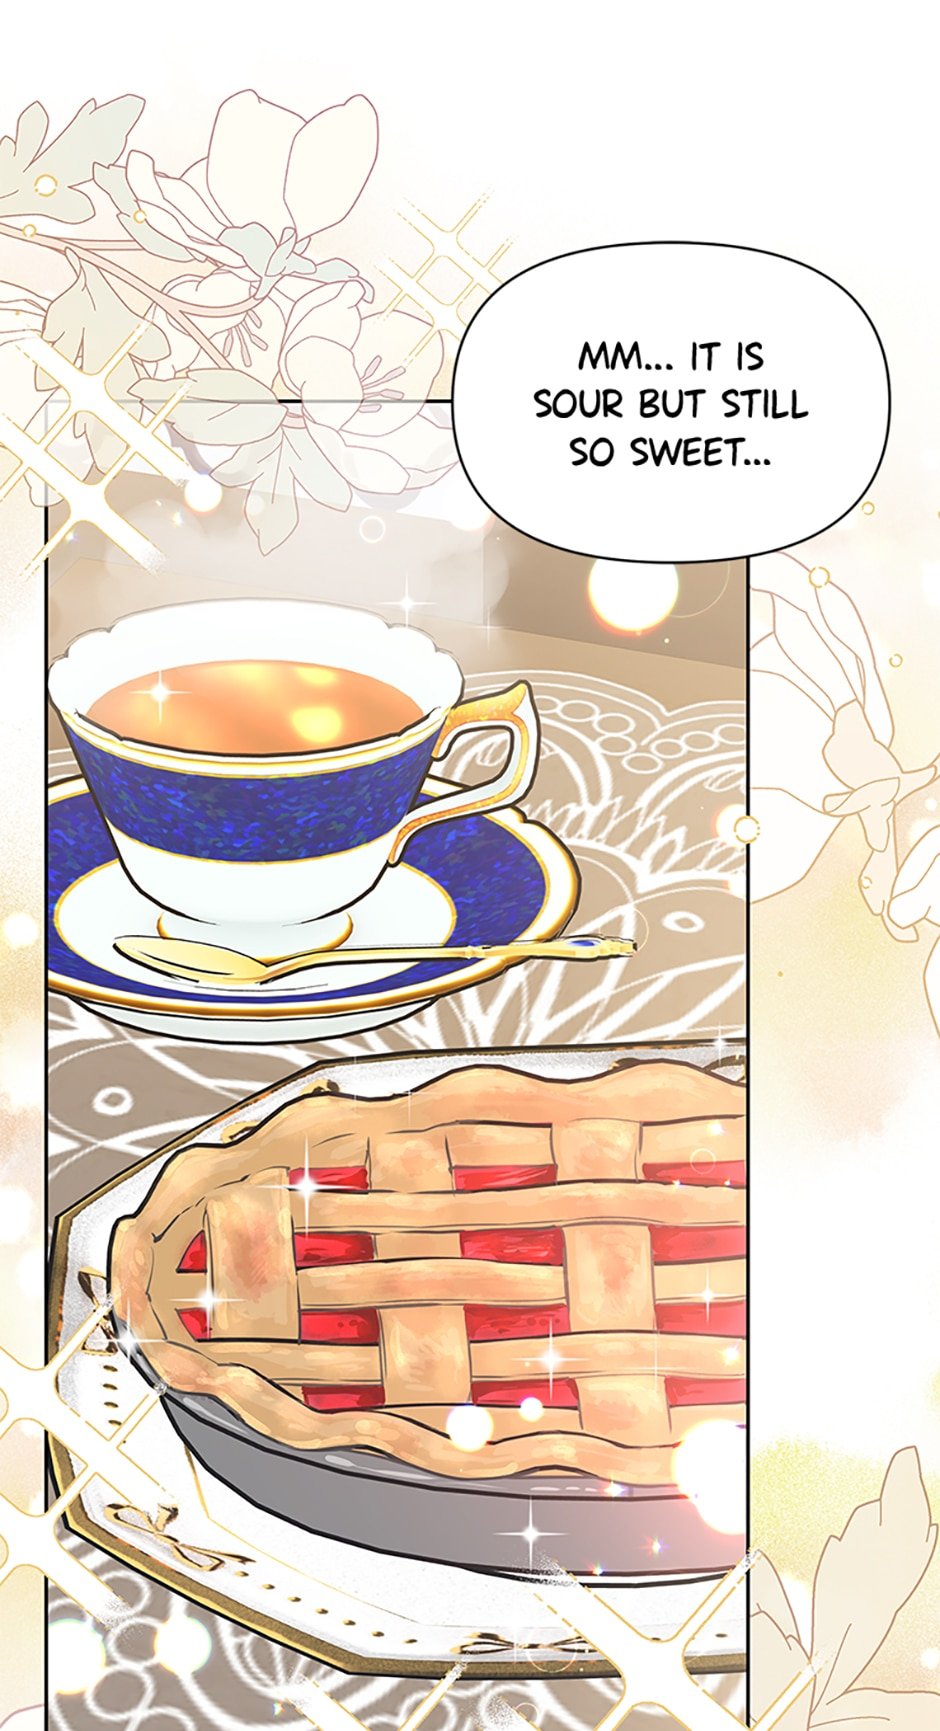 She came back and opened a dessert shop chapter 48